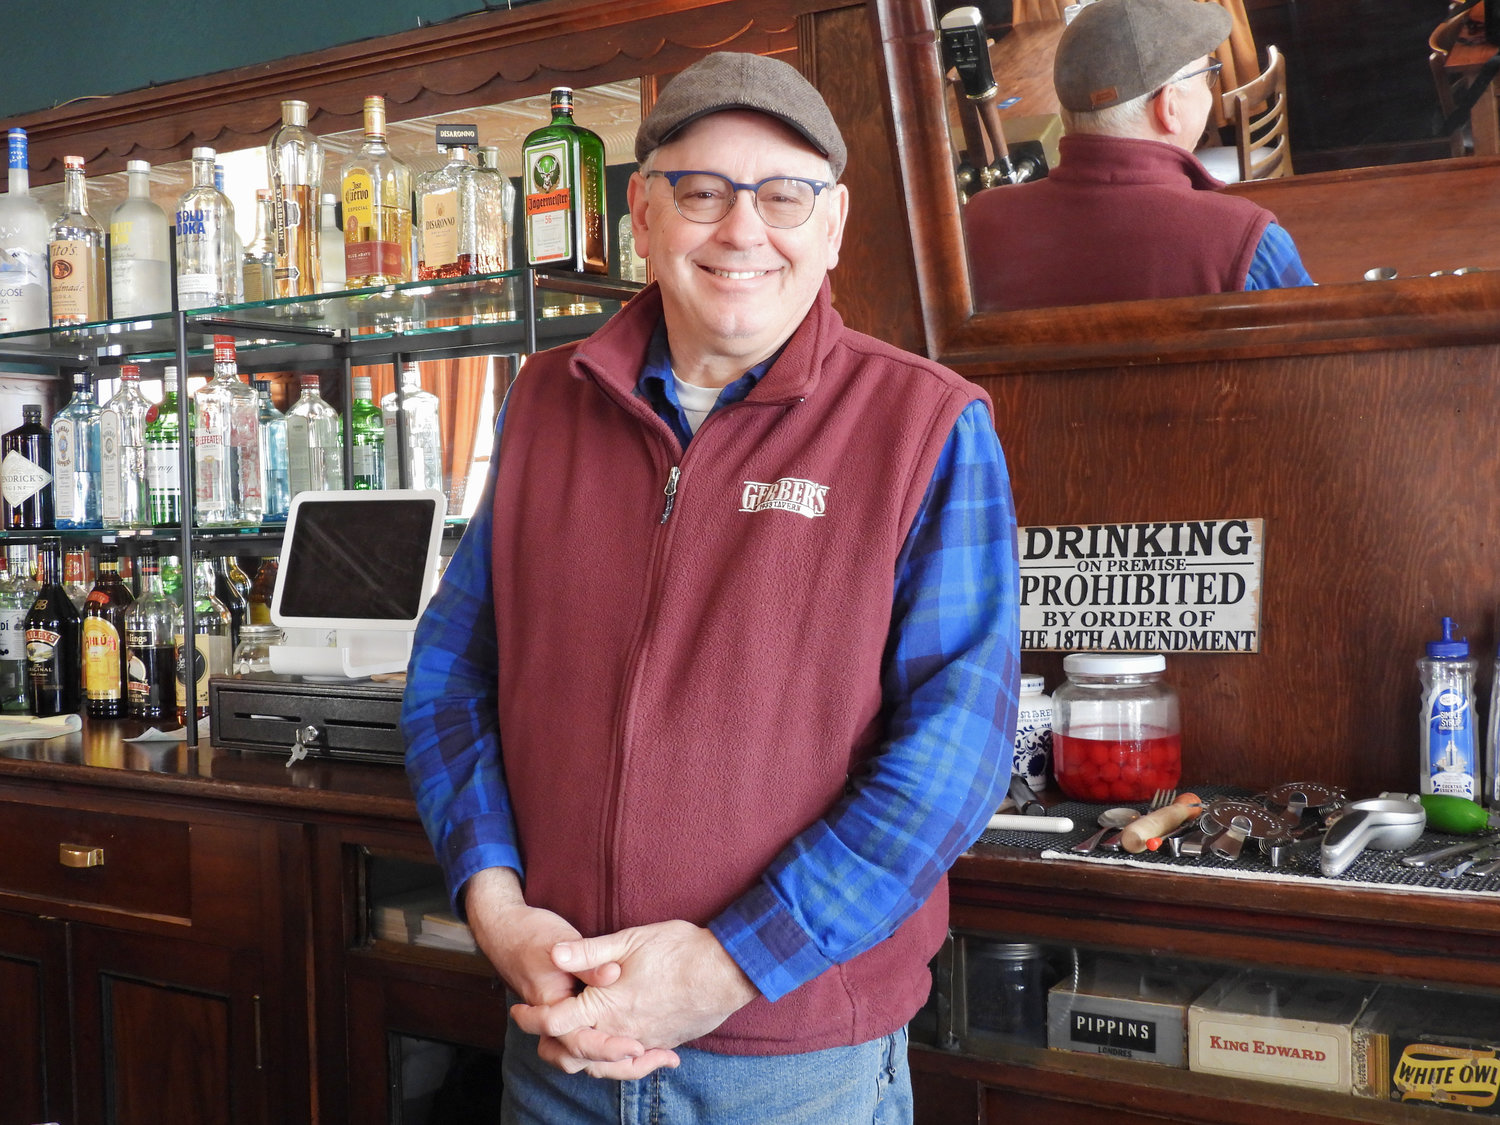 WALKABLE UTICA — Mark Mojave, owner of Gerber’s 1933 Tavern, is looking to expand the tavern’s menu to offer more options and is happy to offer a place where people can sit down, enjoy a beer, and feel normal as the country moves past the pandemic. Above all, Mojave advocates for a walkable Utica and wishes to see more emphasis put on it sooner rather than later.